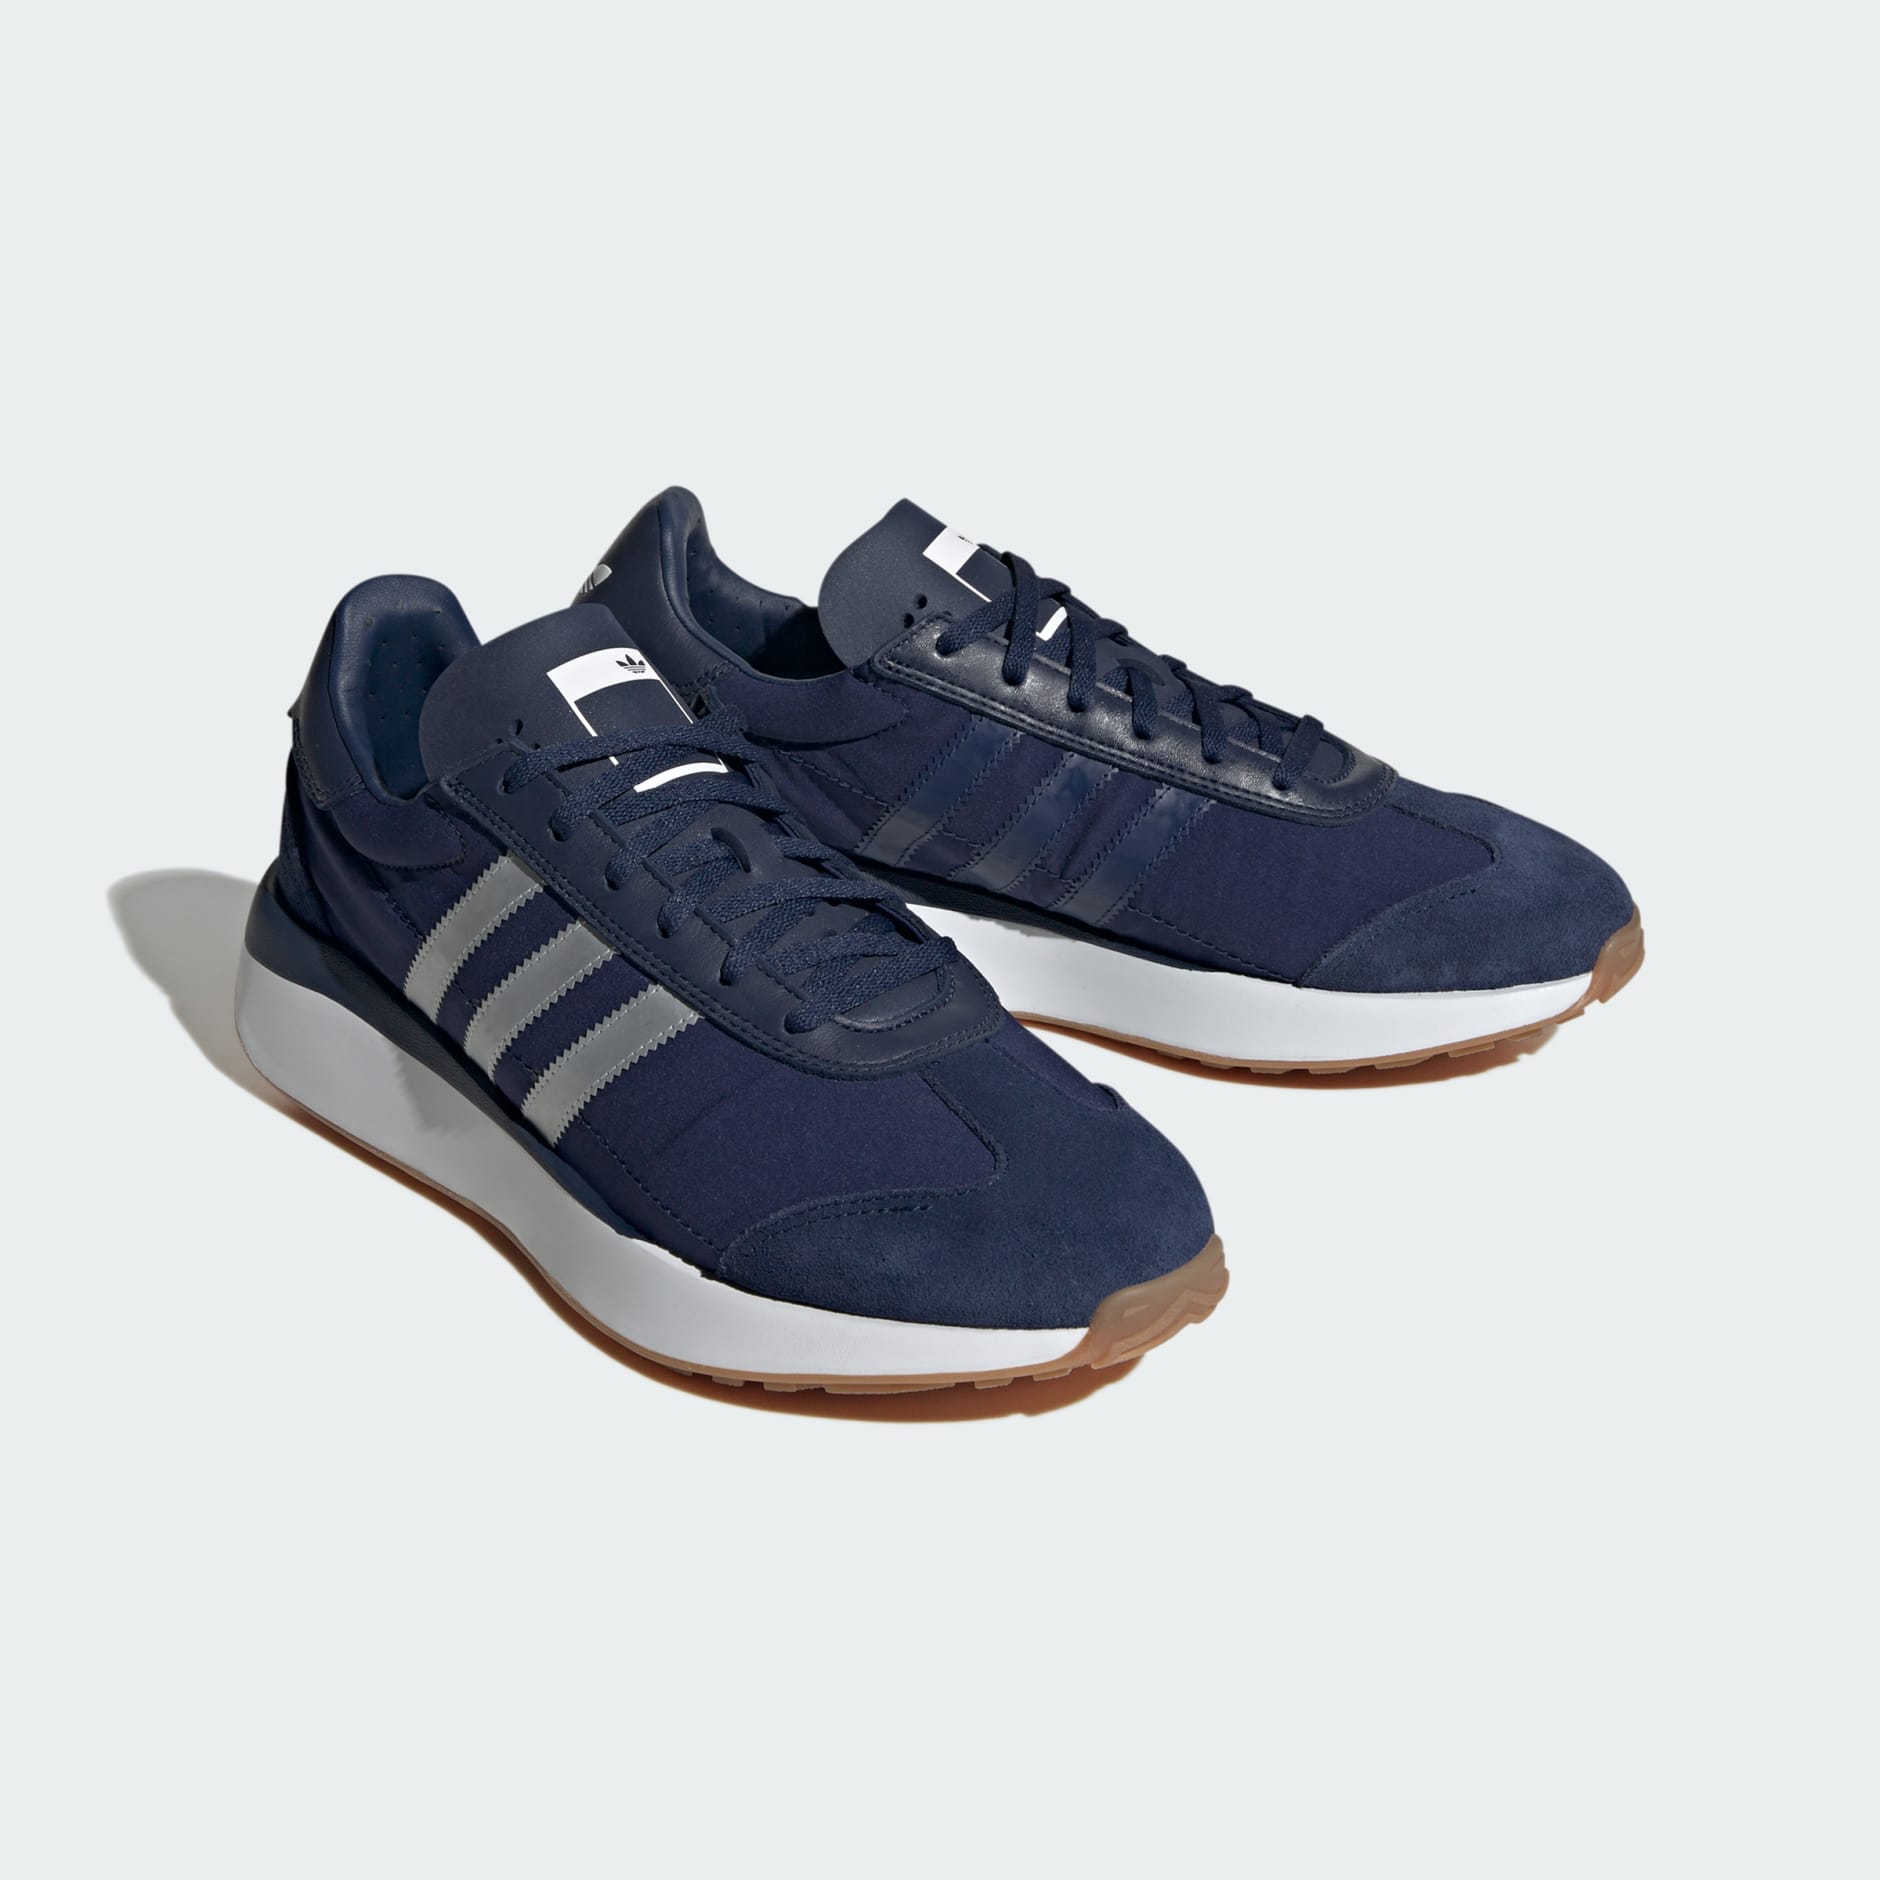 Men's Shoes - Country XLG Shoes - Blue | adidas Qatar